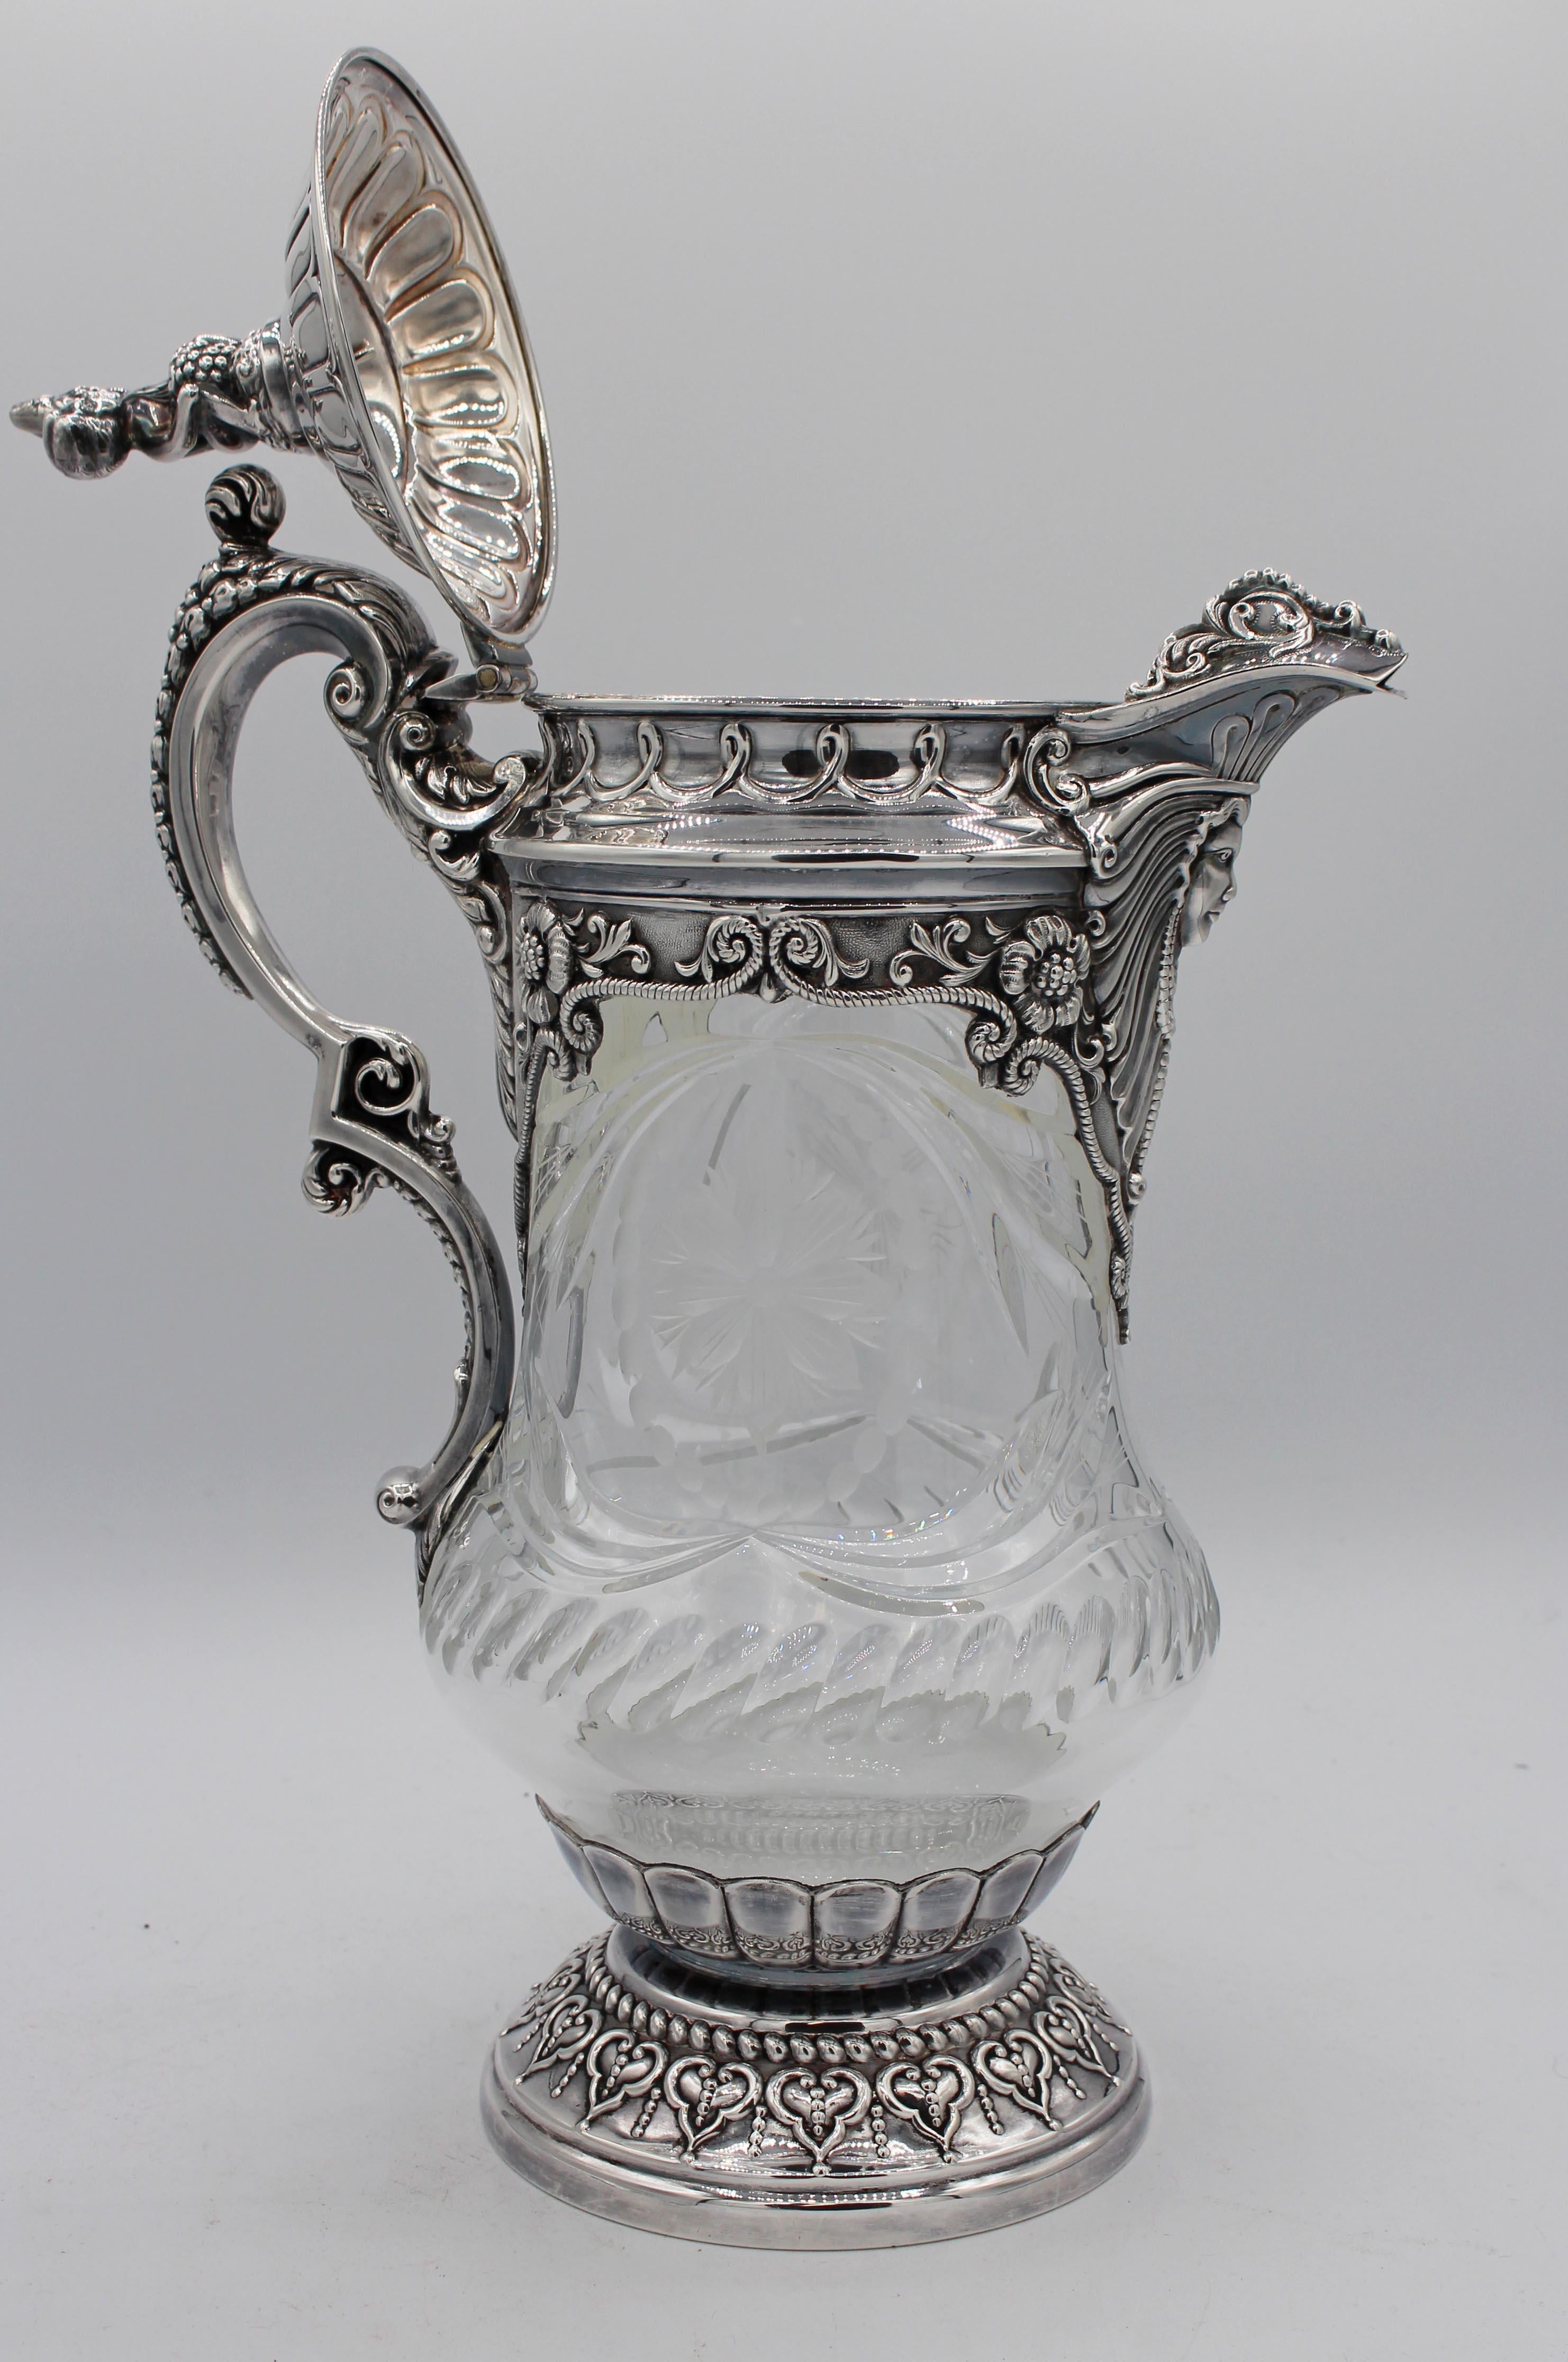 Circa 1890s Silver-Plated & Cut Glass Wine or Water Flagon by Topázio, Portugues 2